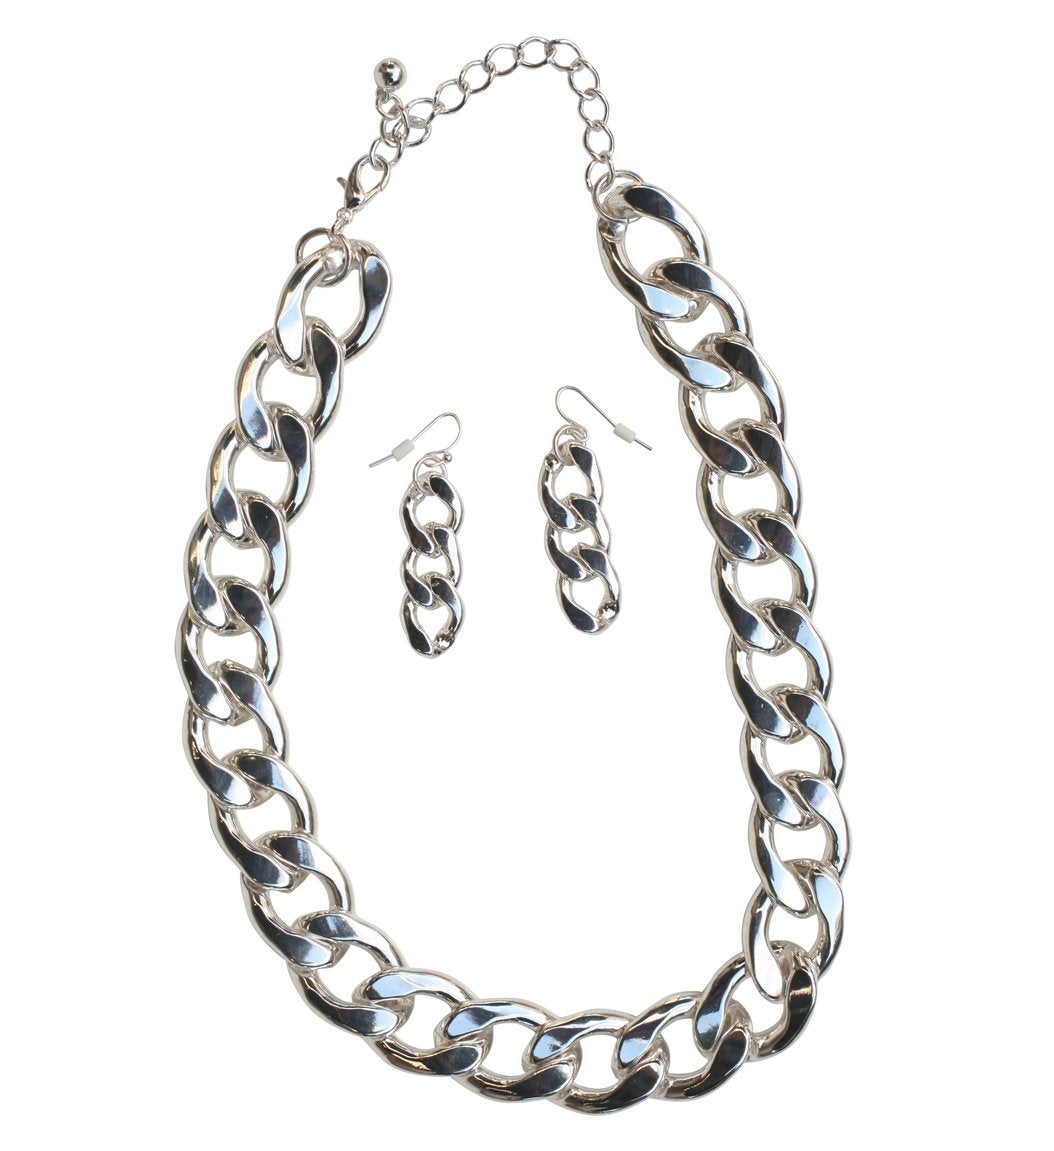 High Polished Silver Flat Curved Necklace with Matching Earrings